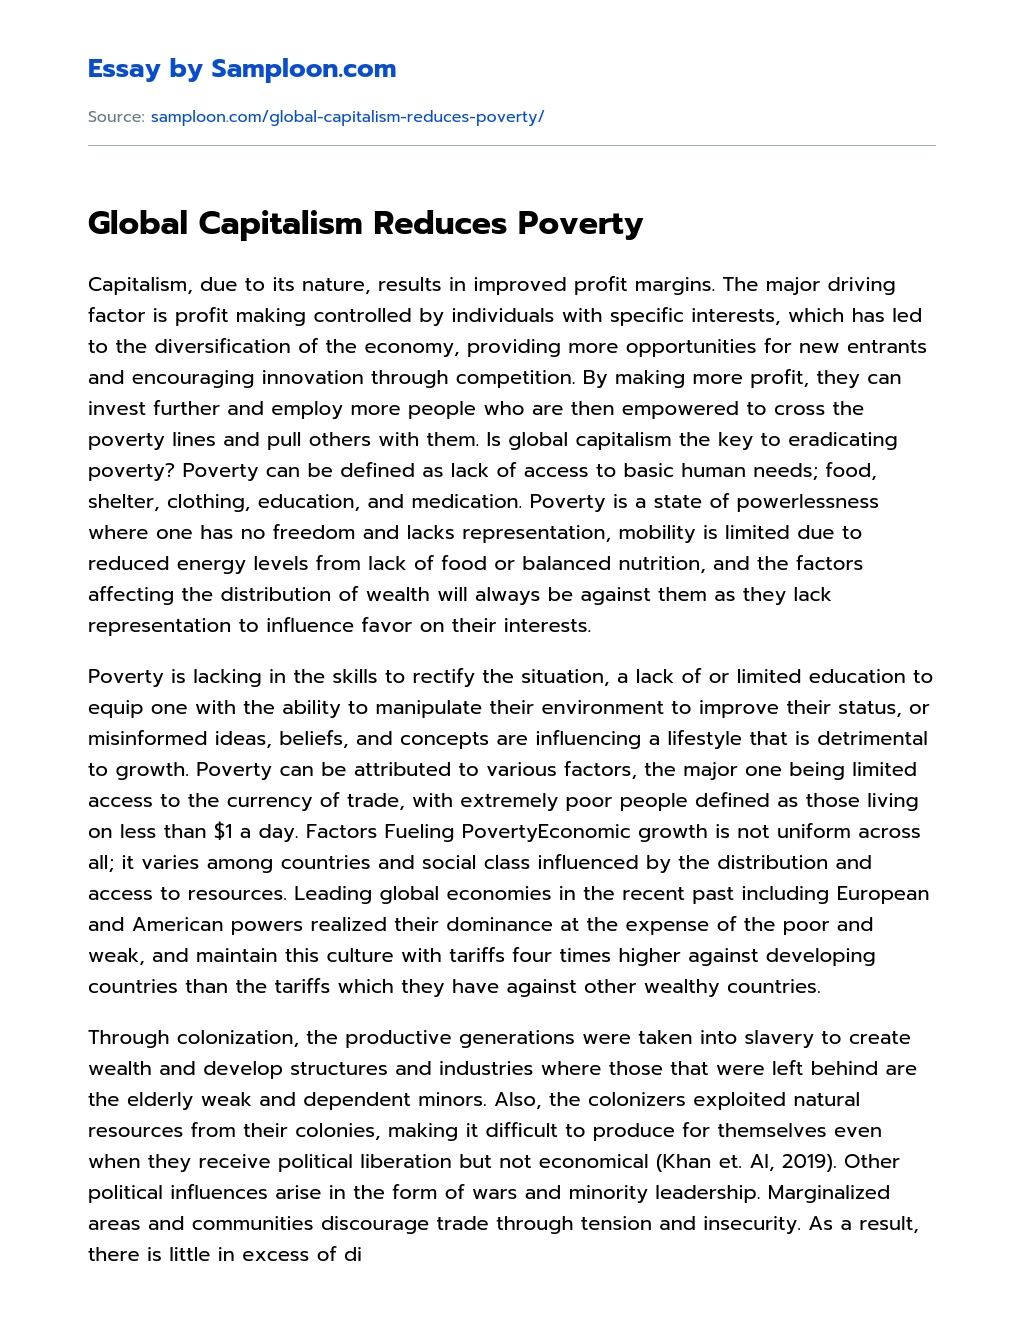 Global Capitalism Reduces Poverty essay